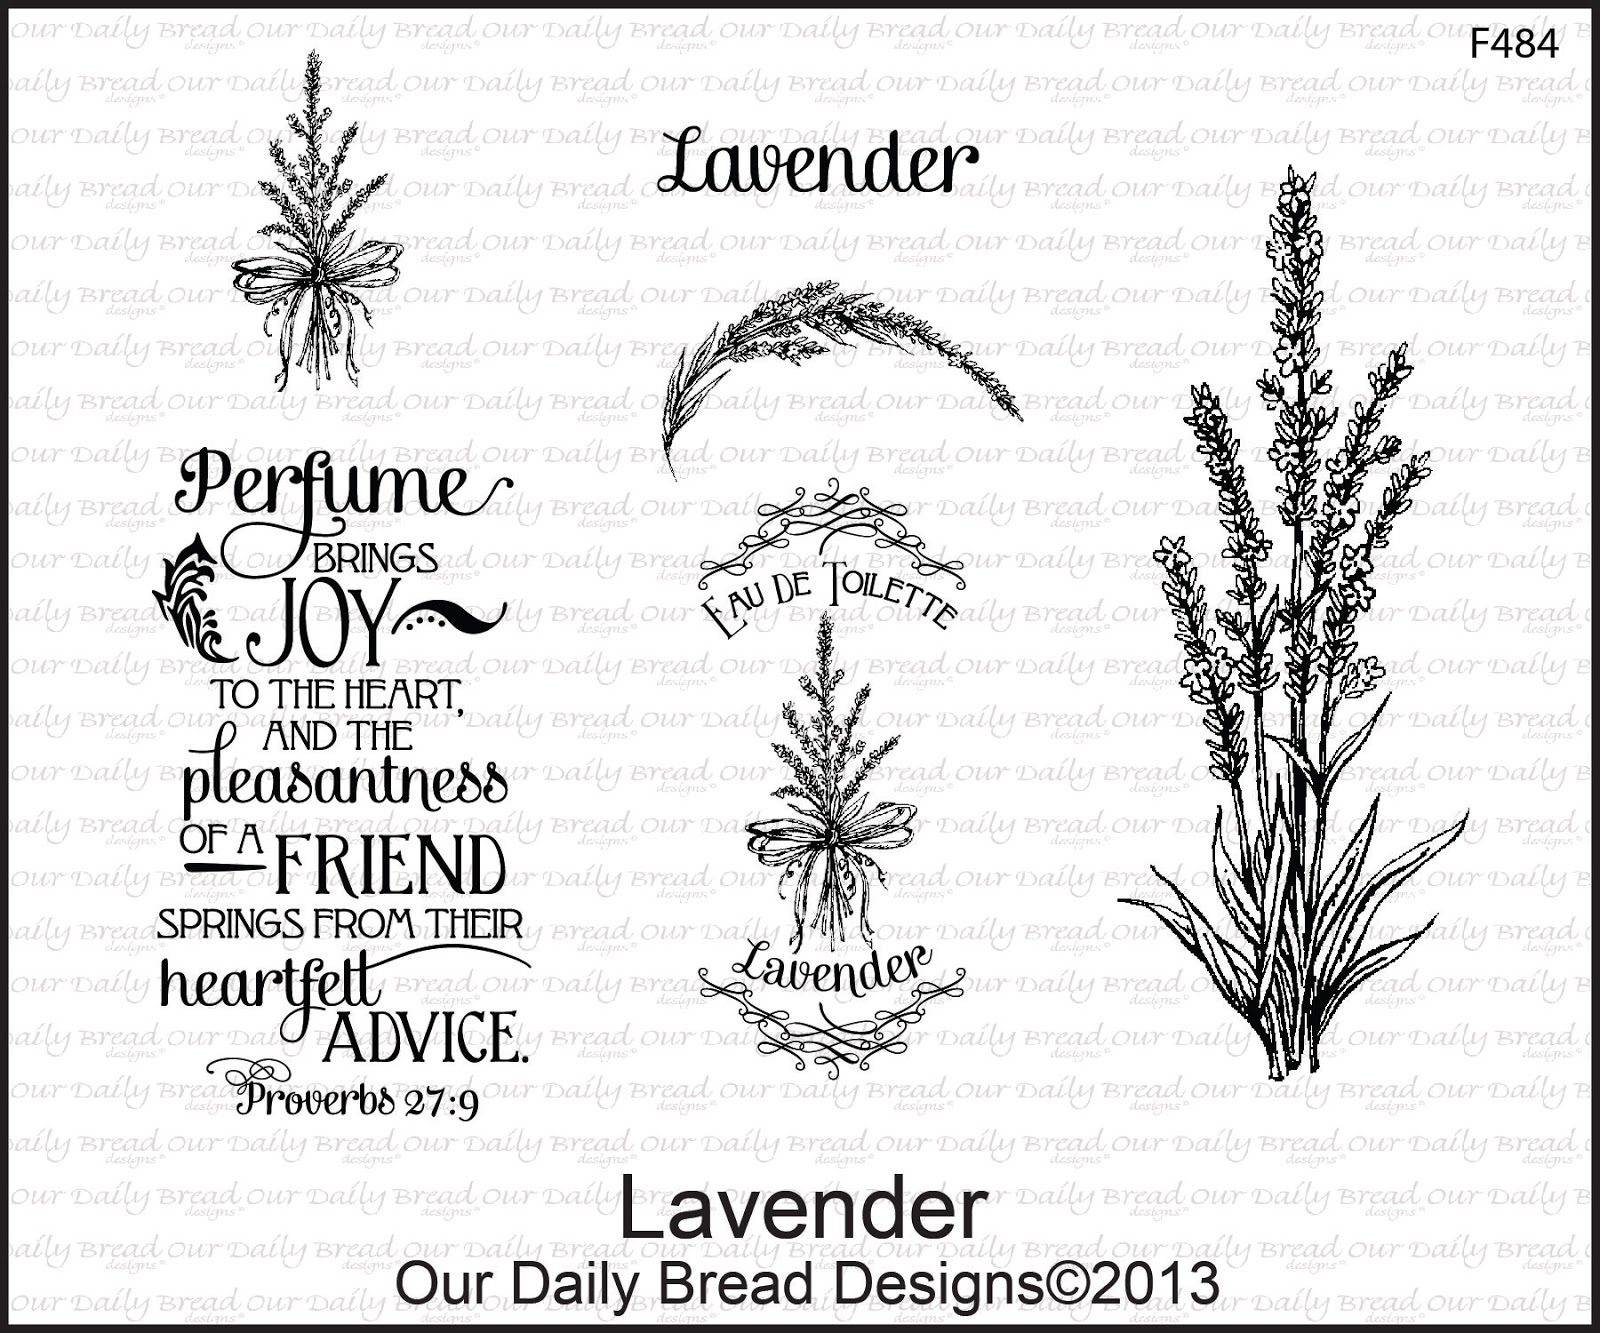 http://www.ourdailybreaddesigns.com/index.php/lavender.html